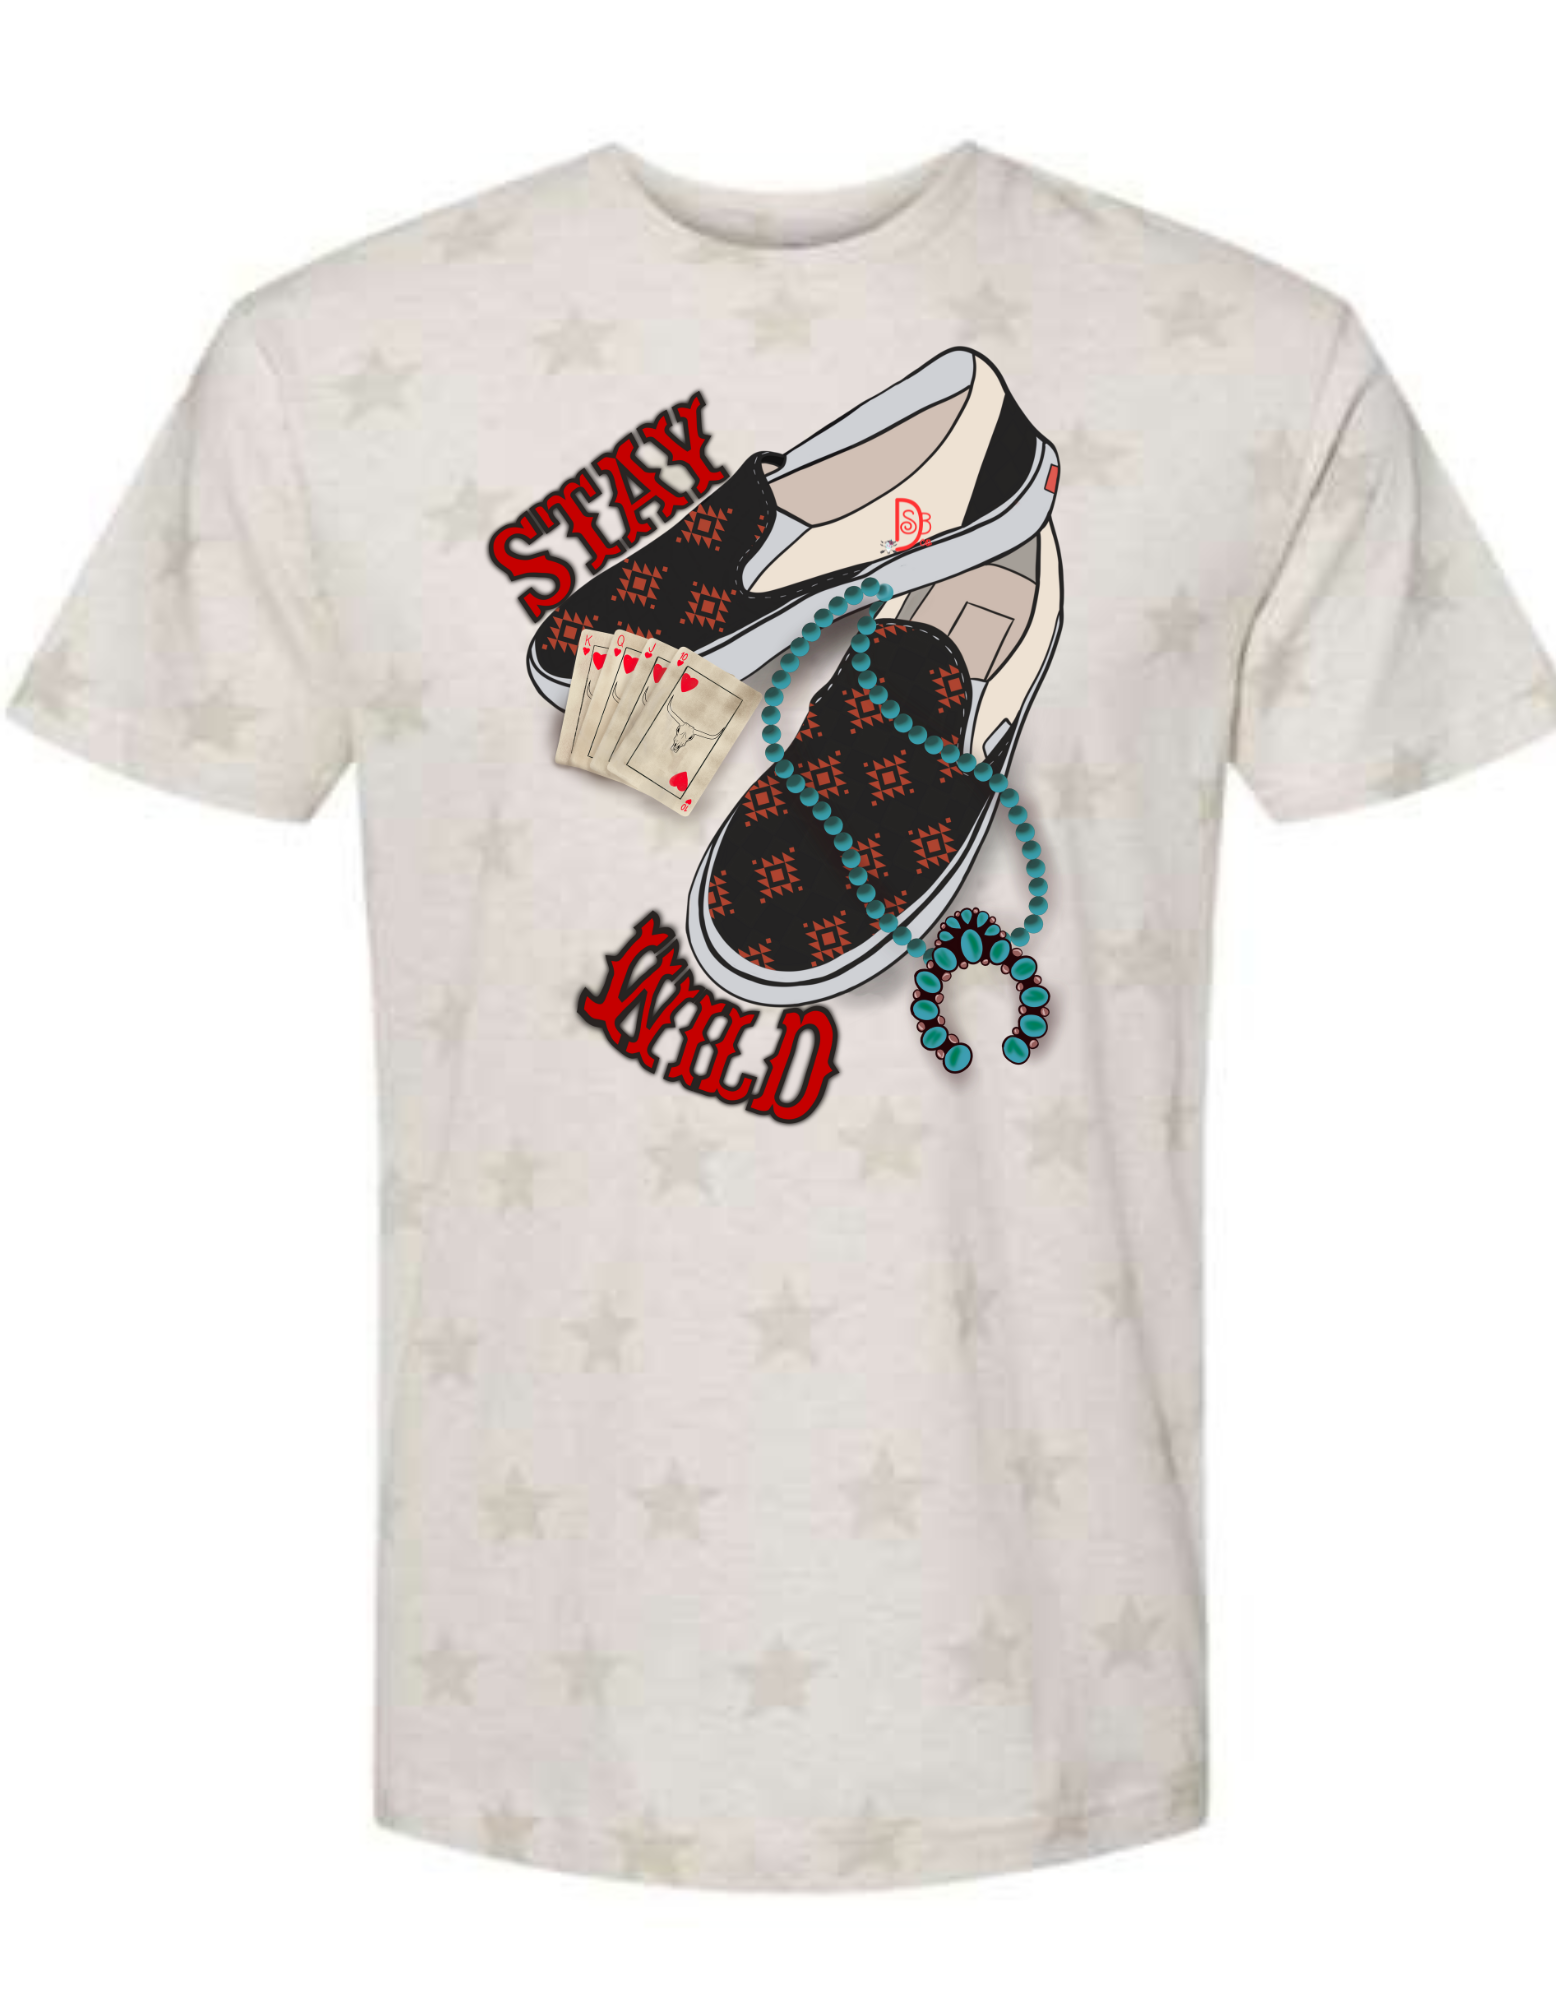 Stay Wild Punchy Graphic Tee-Graphic Tees-Deadwood South Boutique & Company-Deadwood South Boutique, Women's Fashion Boutique in Henderson, TX